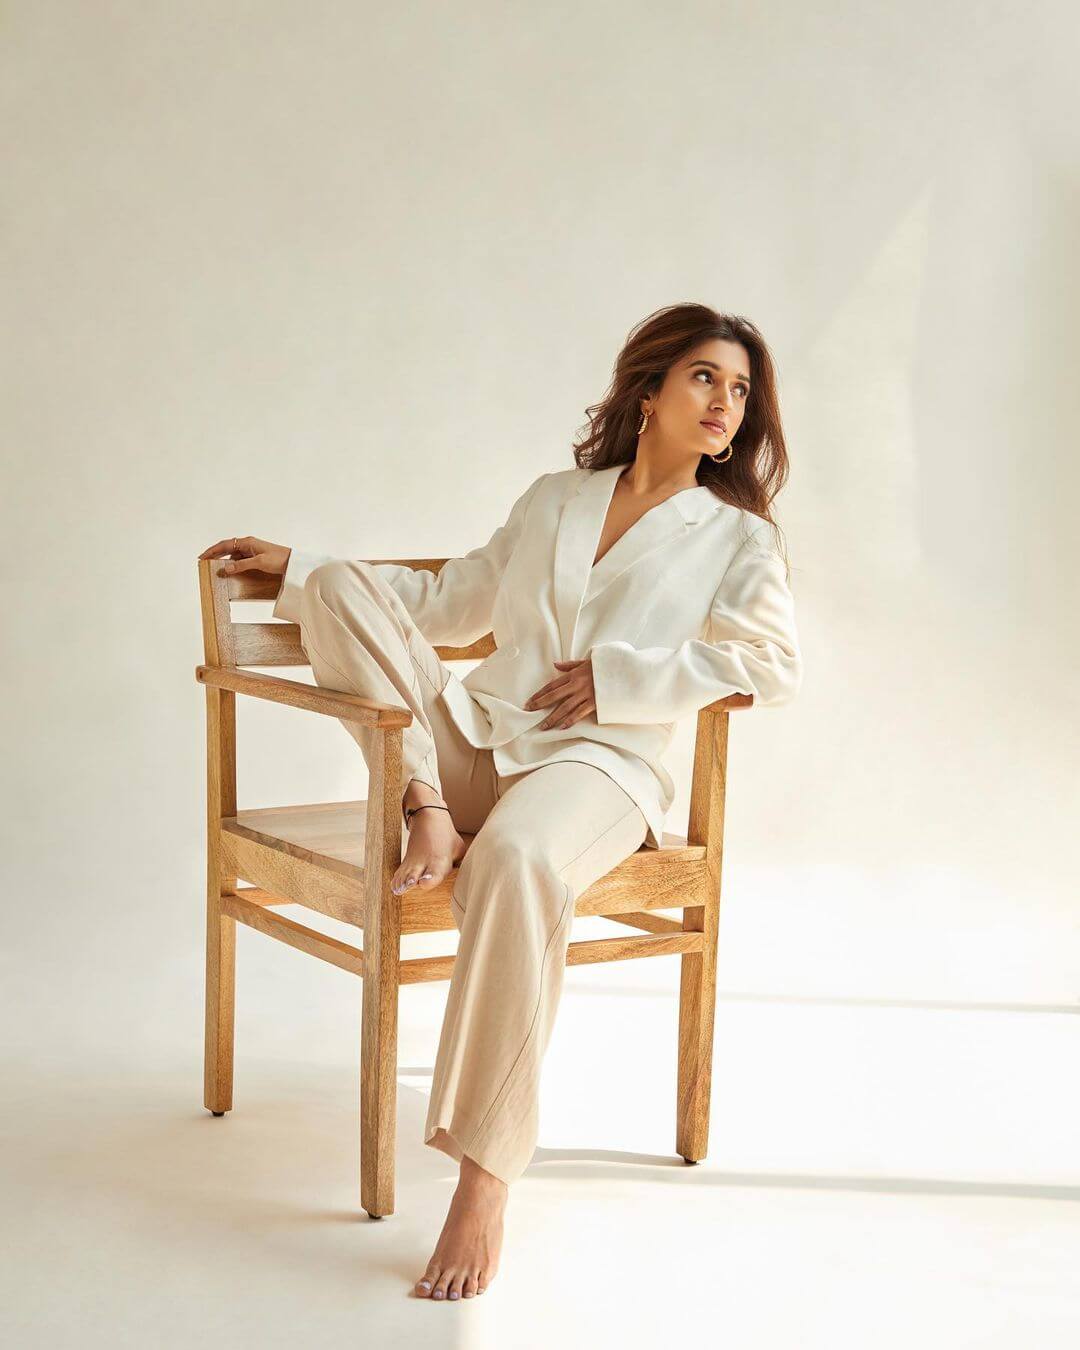 Nidhi Shah Strike A Pose In White Blazer With Beige Pants